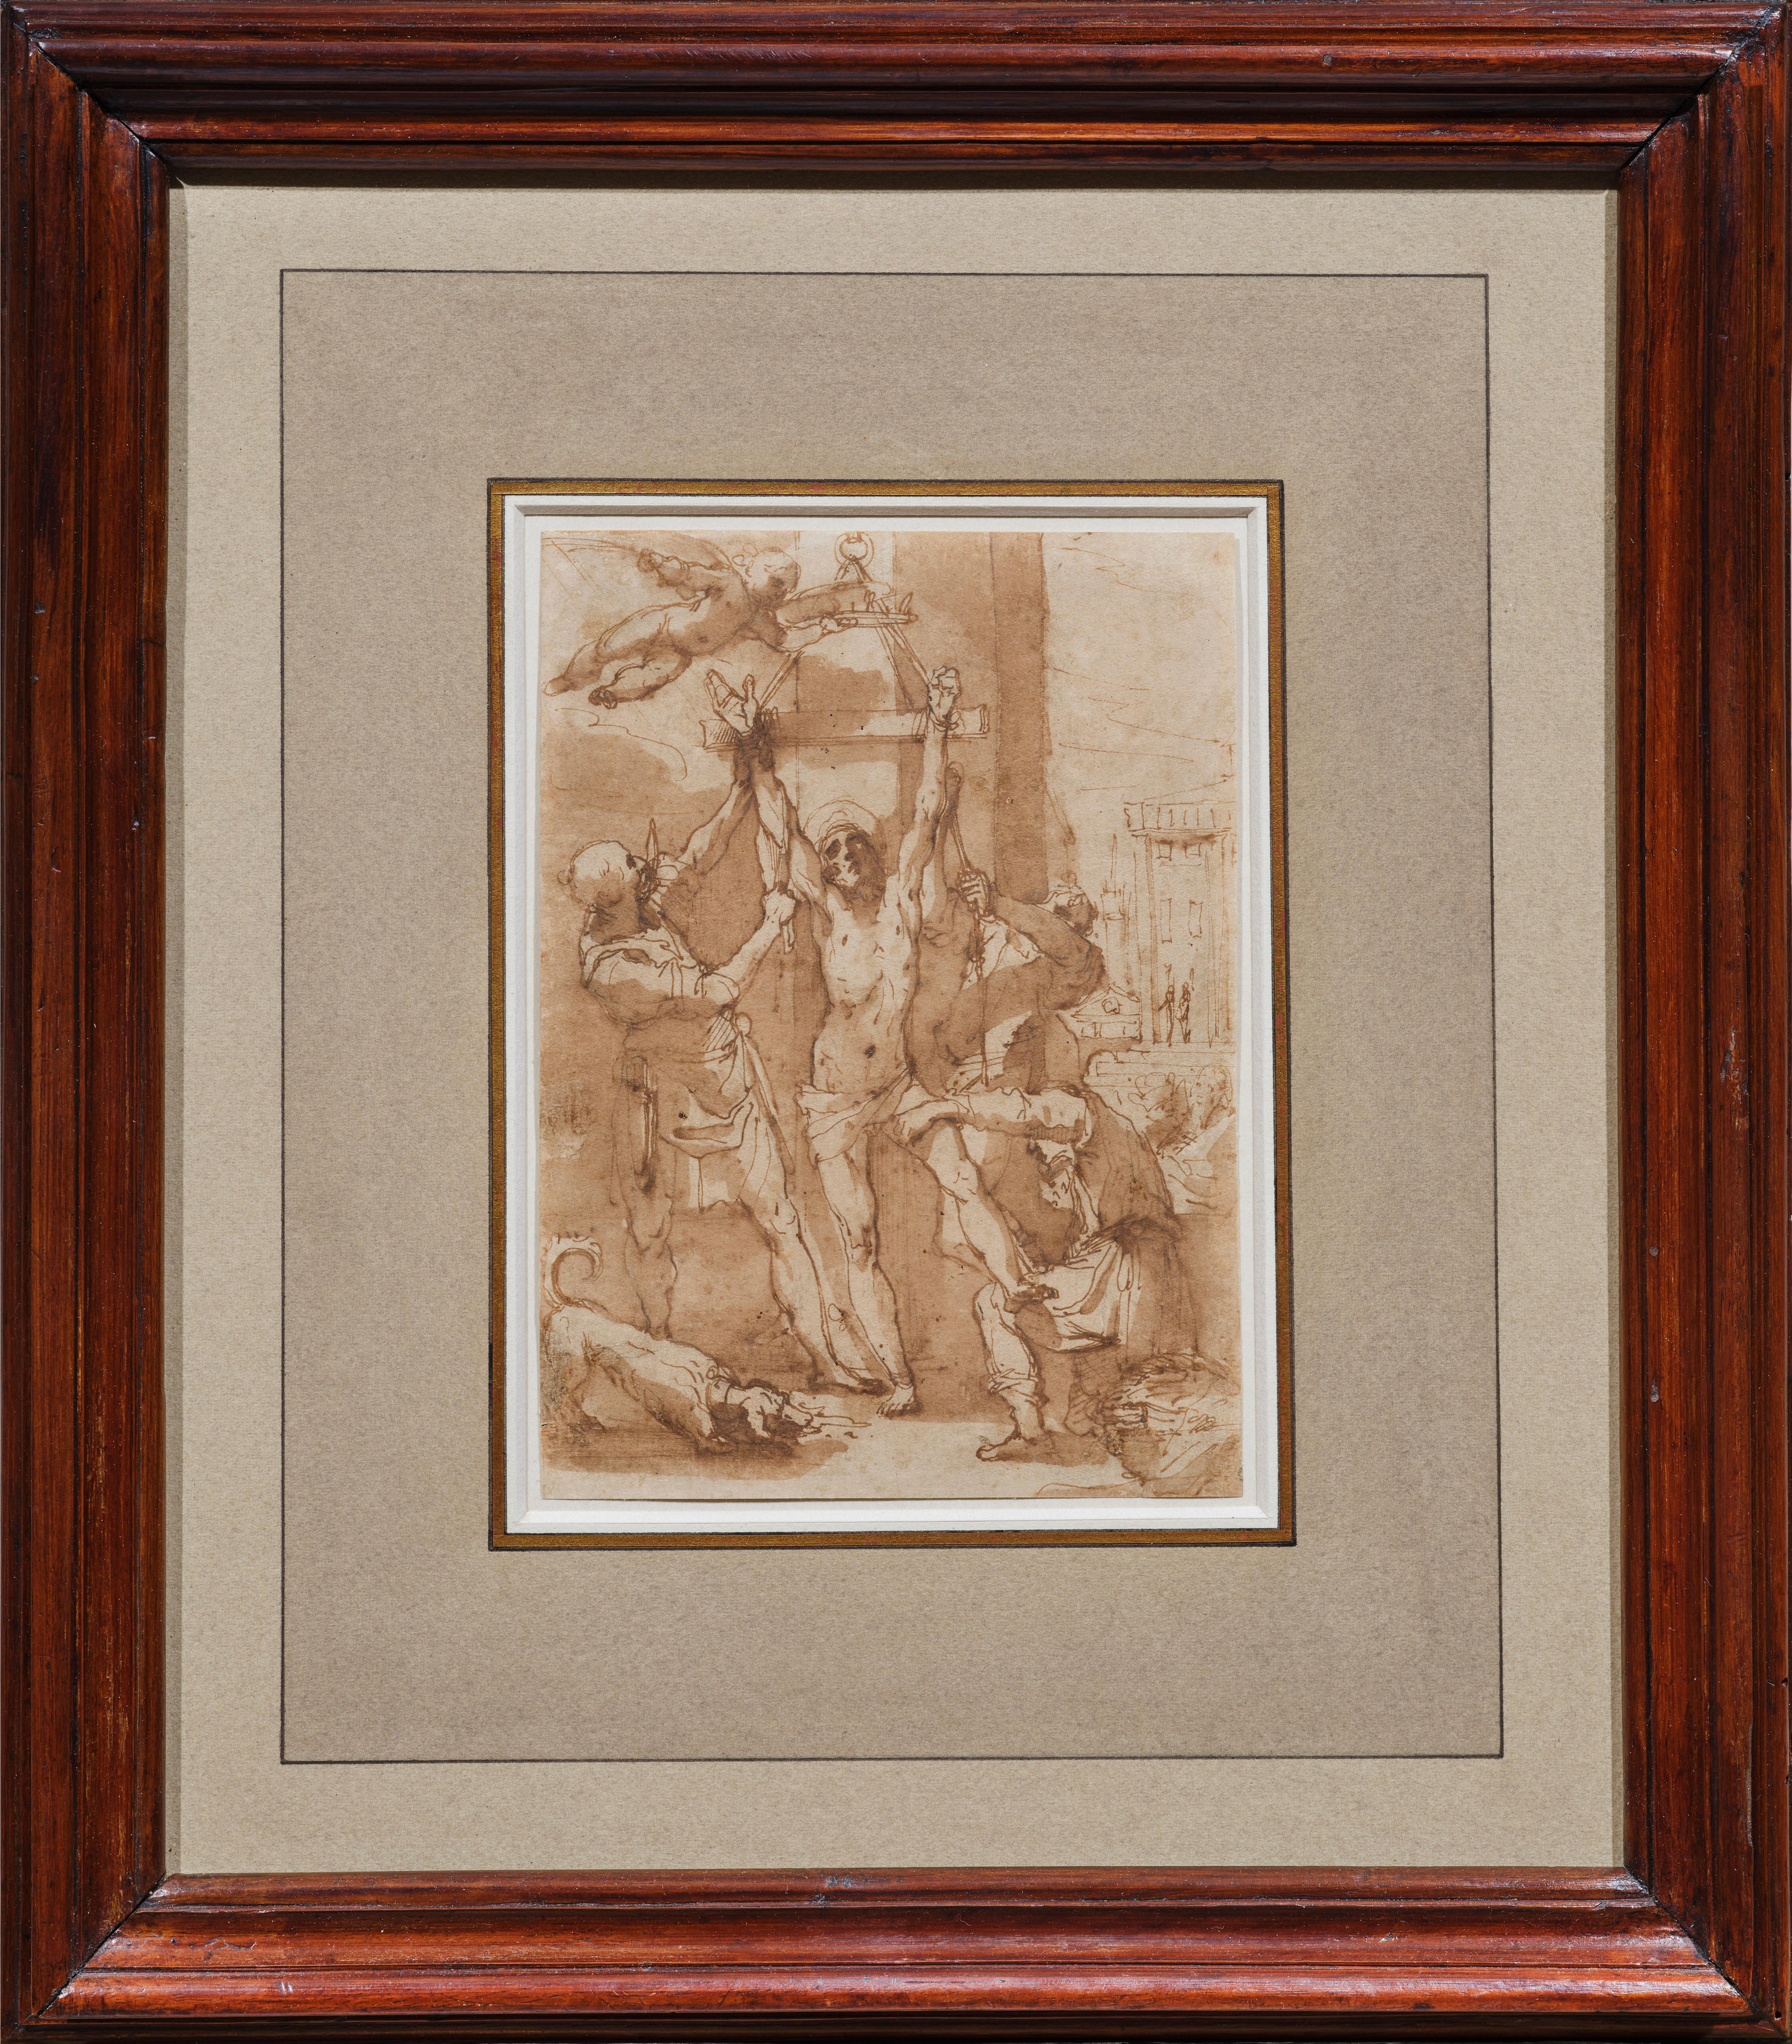 This powerful pen and brown ink wash drawing is a study for an altarpiece depicting The Martyrdom of Saint Bartholomew. Signed and dated 1604, it was painted at the end of his life by Alessandro Casolani, one of the last representatives of Sienese